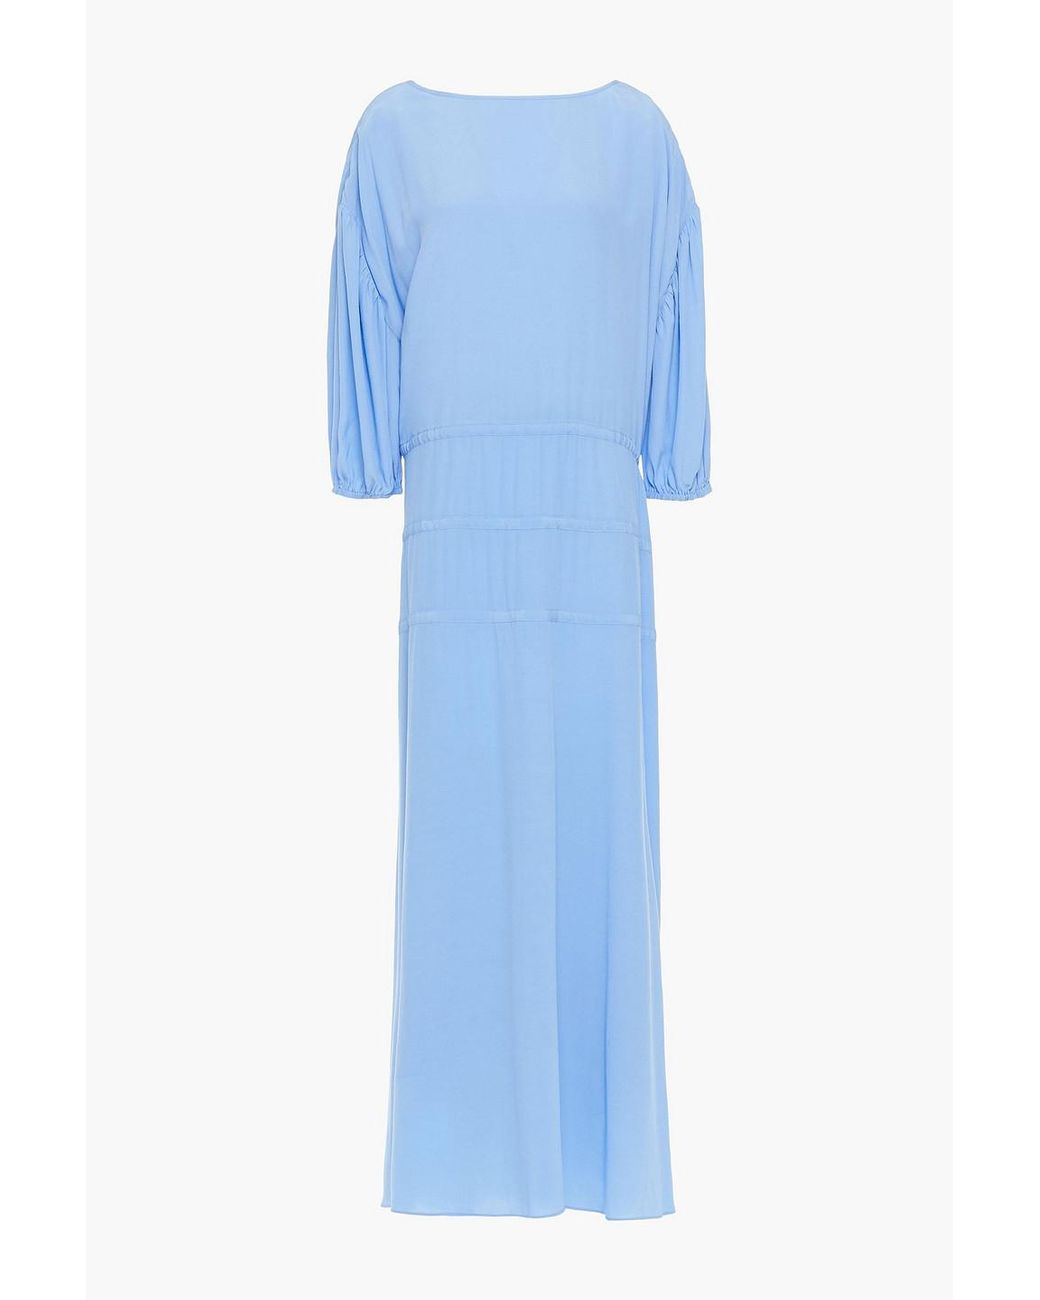 Rodebjer Synthetic Amane Gathered Crepe De Chine Maxi Dress in Blue | Lyst